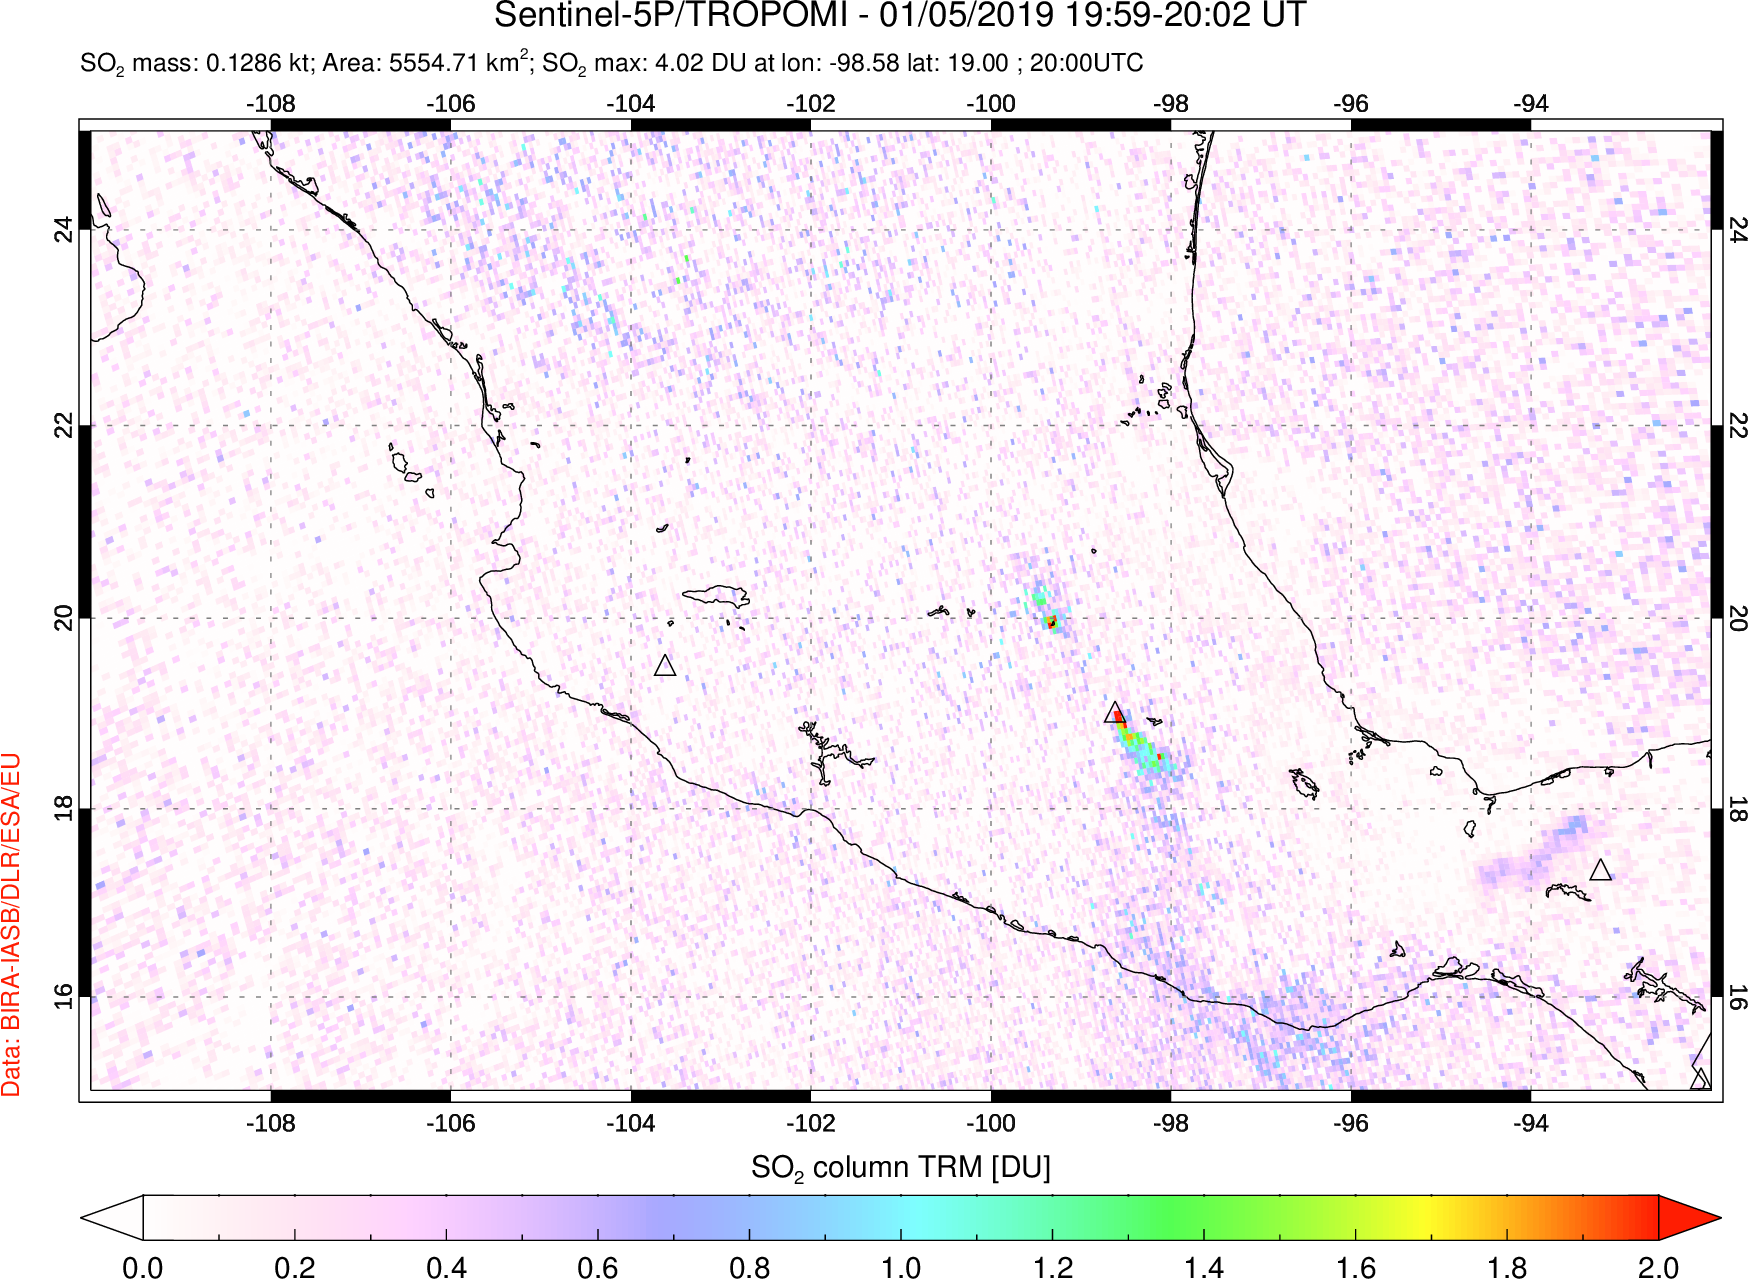 A sulfur dioxide image over Mexico on Jan 05, 2019.